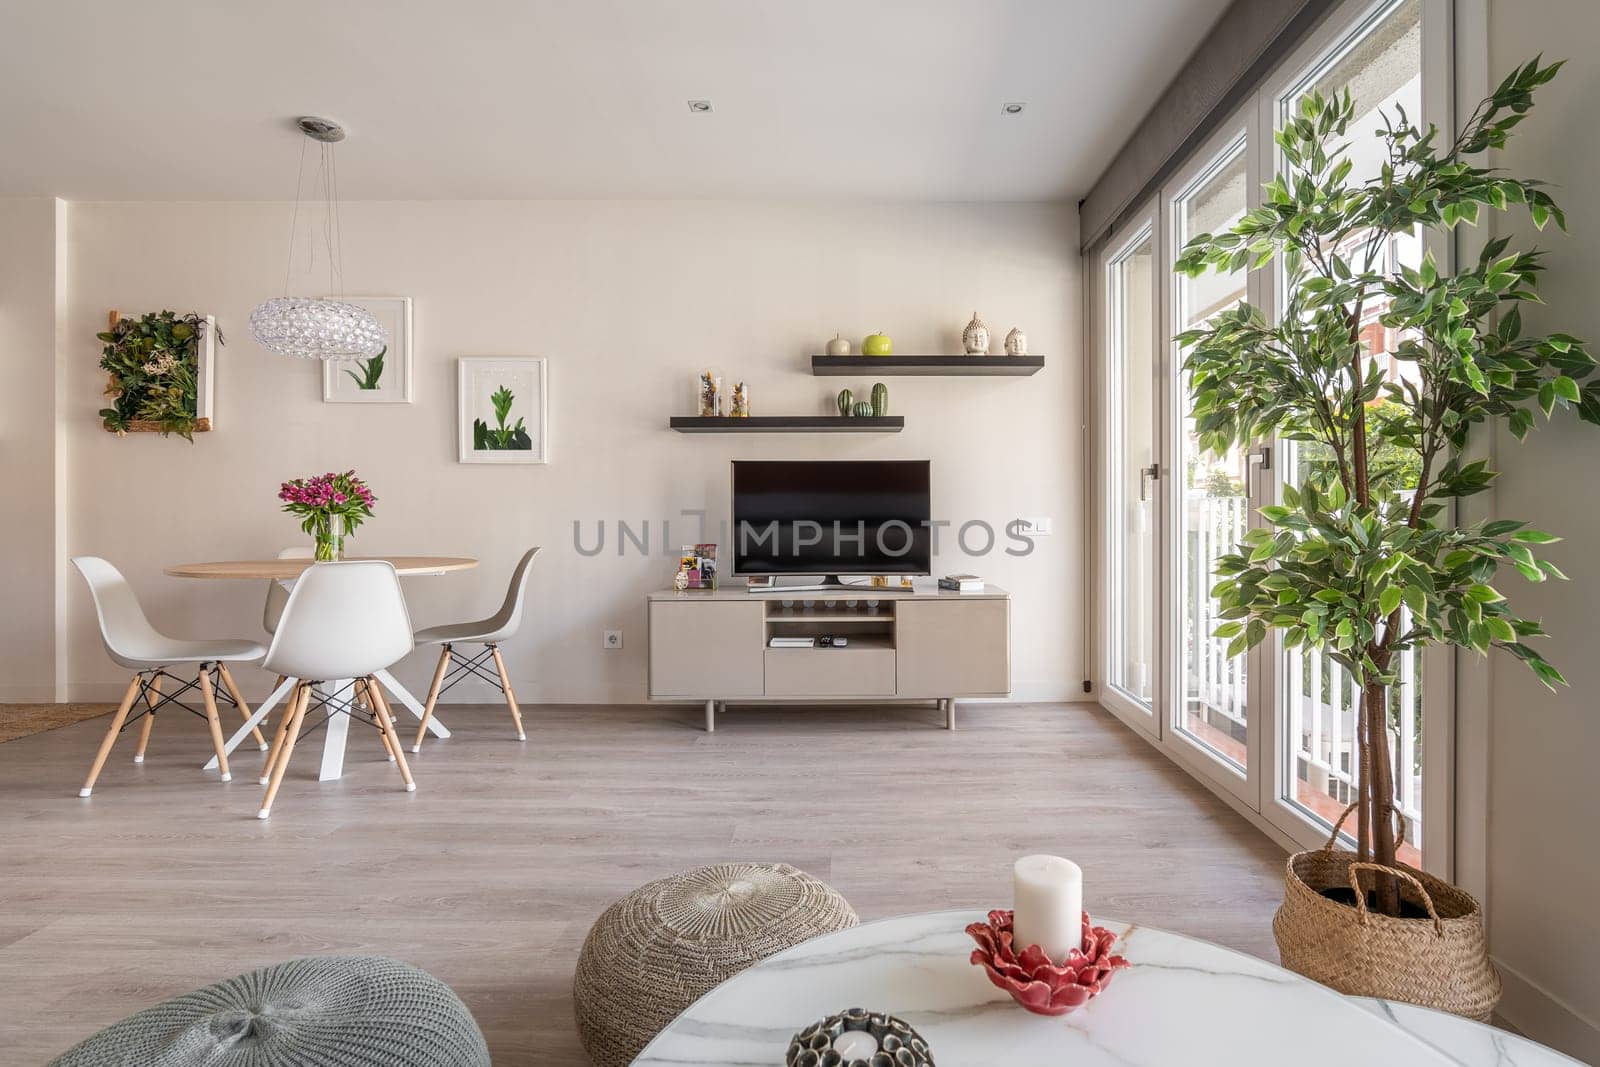 Spacious living room with large windows, dining table on the backdrop of a wall with a TV, shelves and decorative accessories and plants. Concept of functional and stylish apartment interior by apavlin